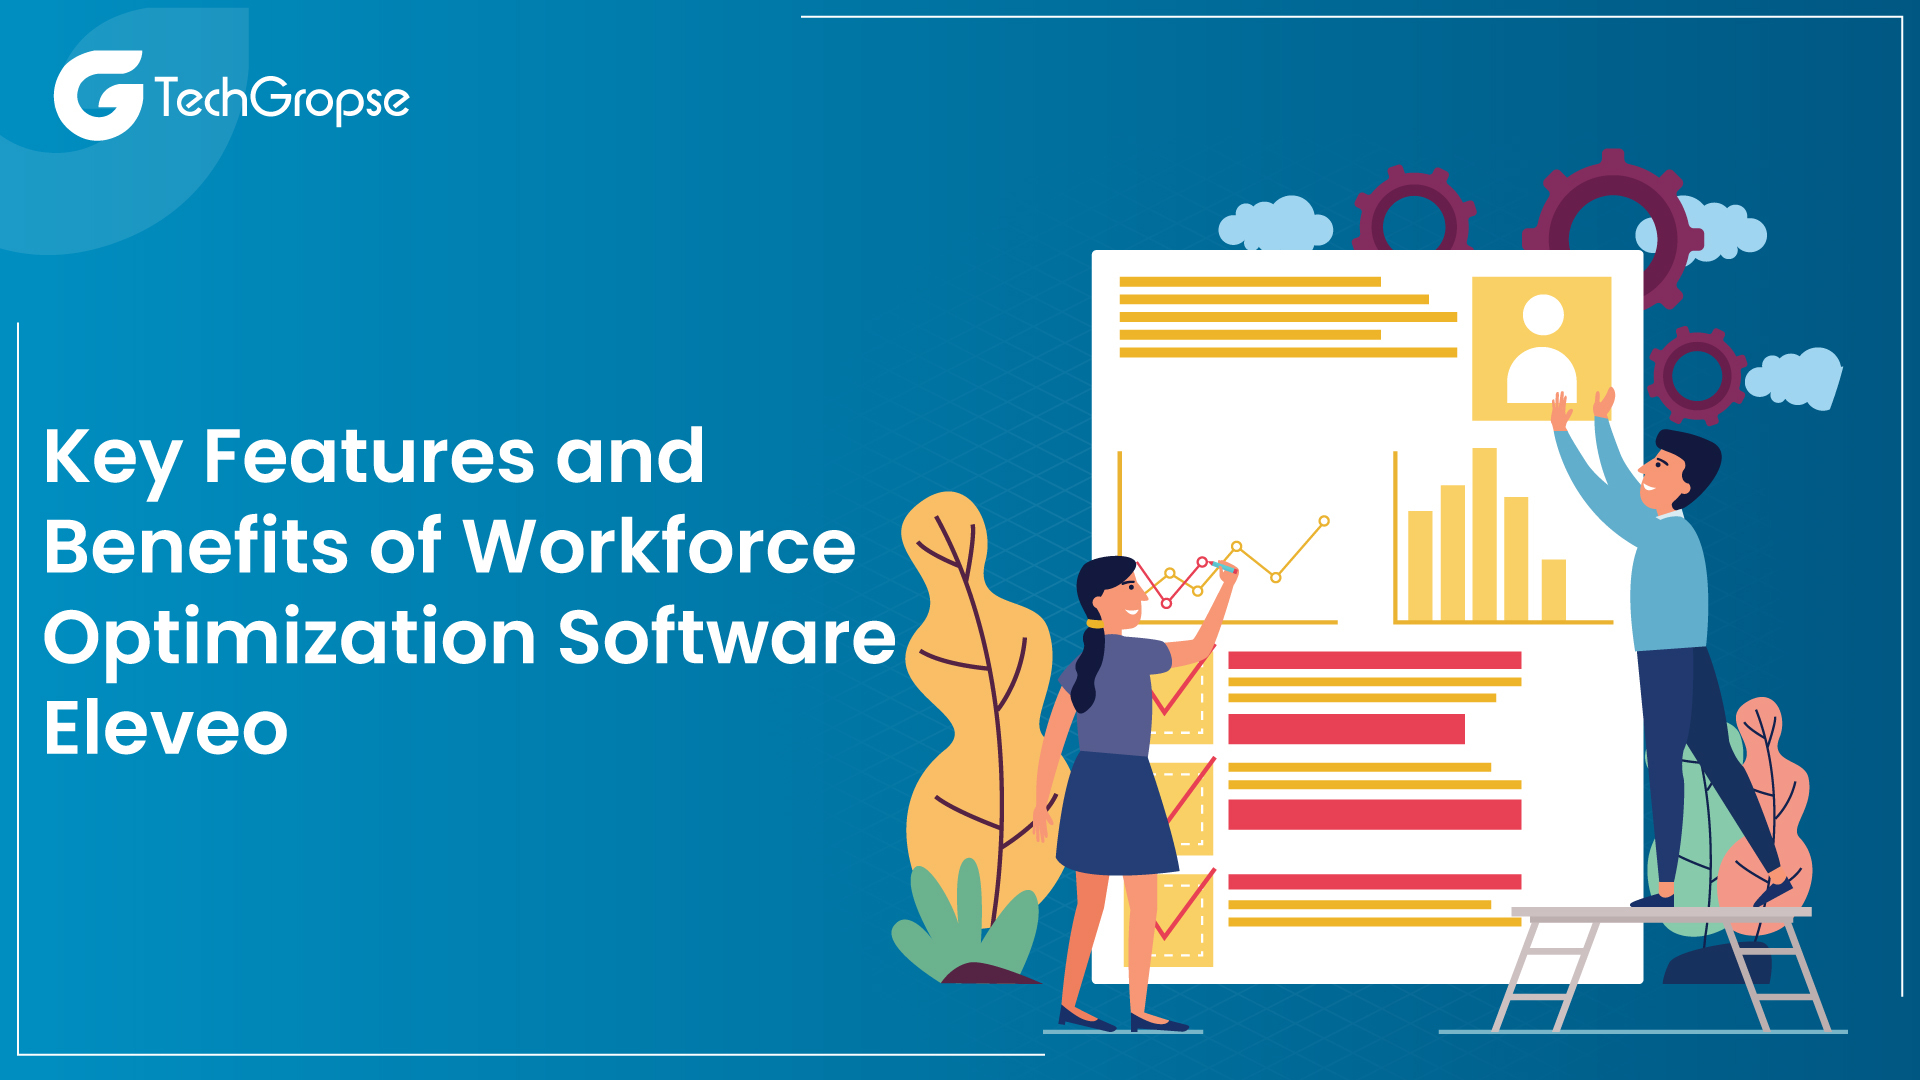 Key Features and Benefits of Workforce Optimization Software Eleveo